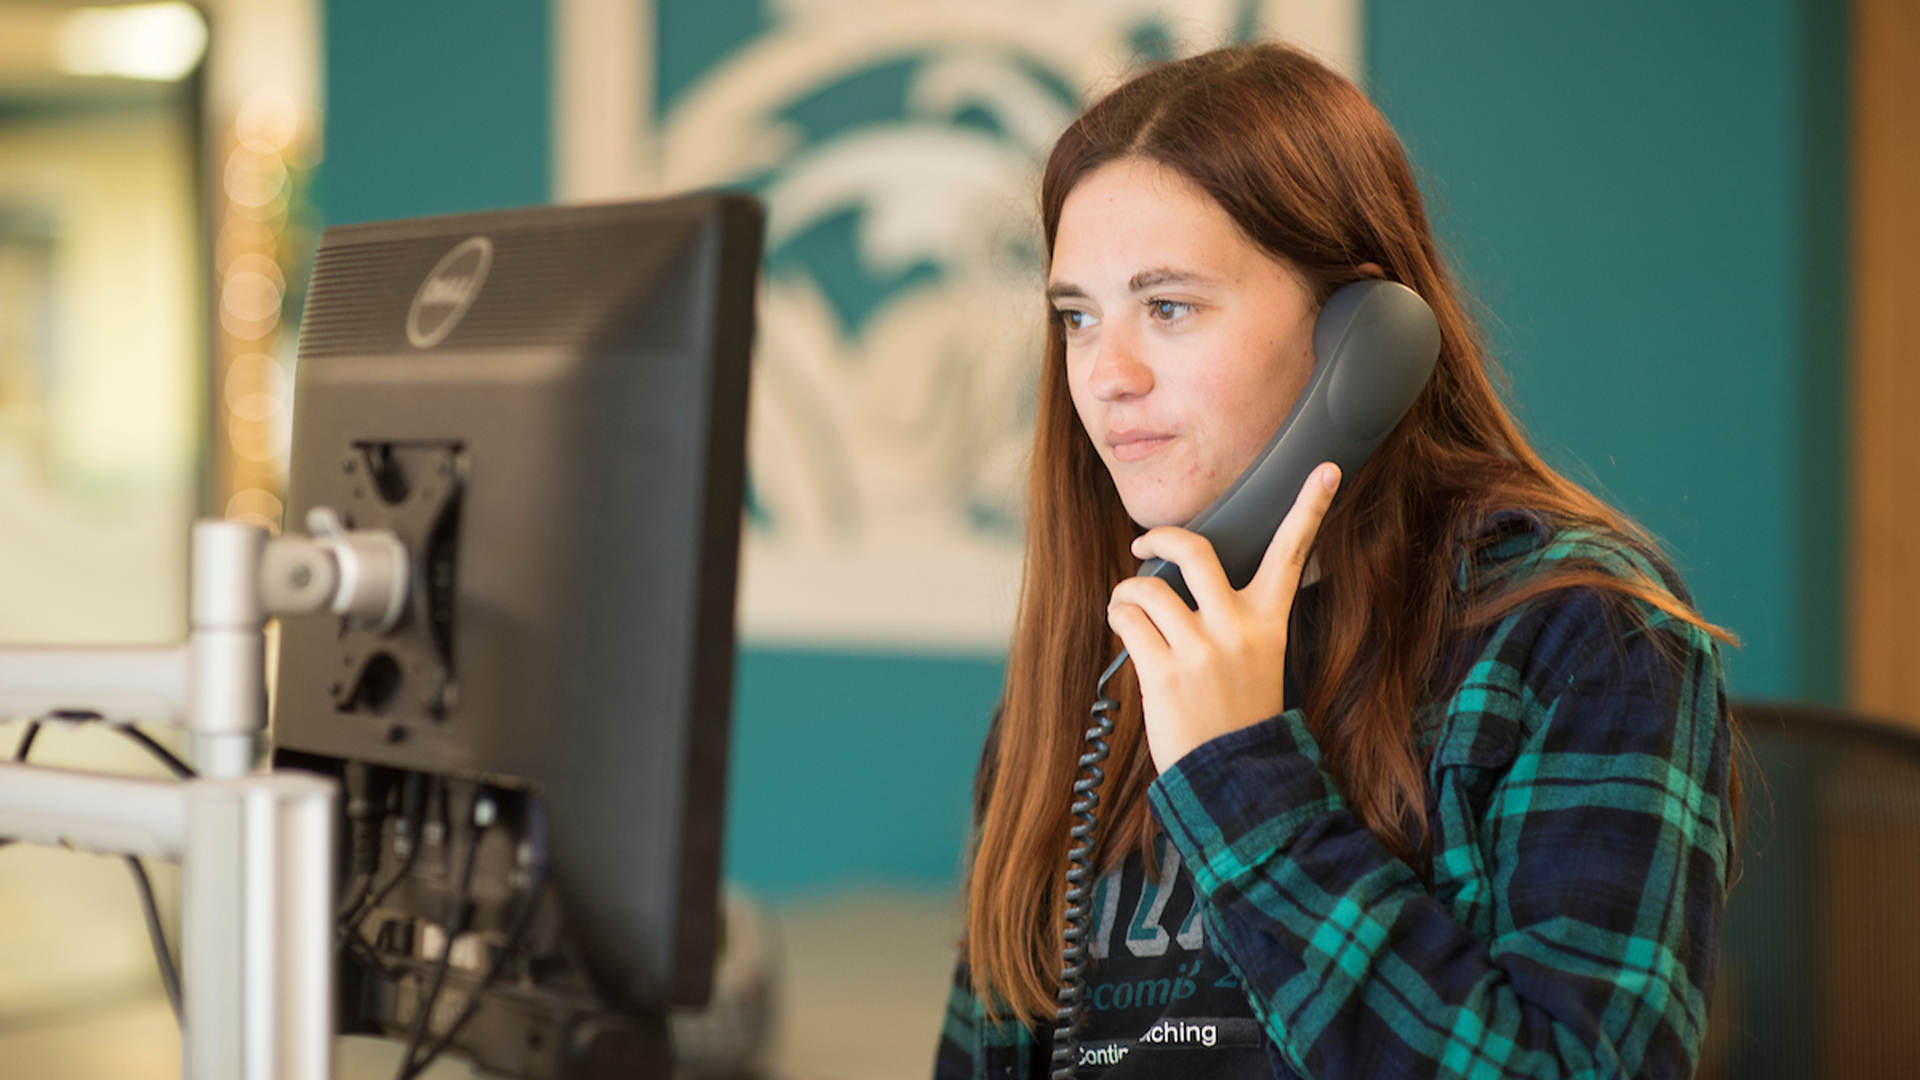 A CHANT411 representative answers the phone and provides information and answers about Coastal Carolina University